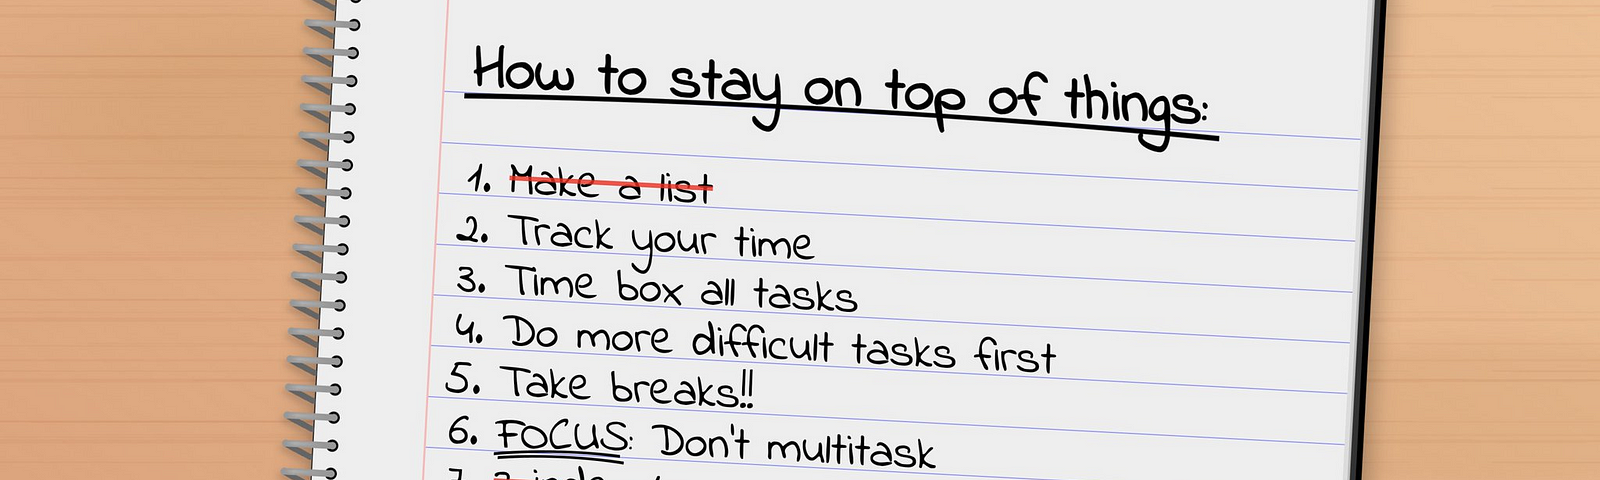 cartoon with a list titled ‘How to stay on top of things’: 1. make a list (striked through); 2. track your time; 3. time box your tasks; 4. more difficult tasks first; 5. take breaks; 6. focus, don’t multitask; 7. z-index: 4 (striked through); 8. z-index: 9999 (striked through); 9. z-index: 99999999 (striked through); 10. z-index: max(infinity)